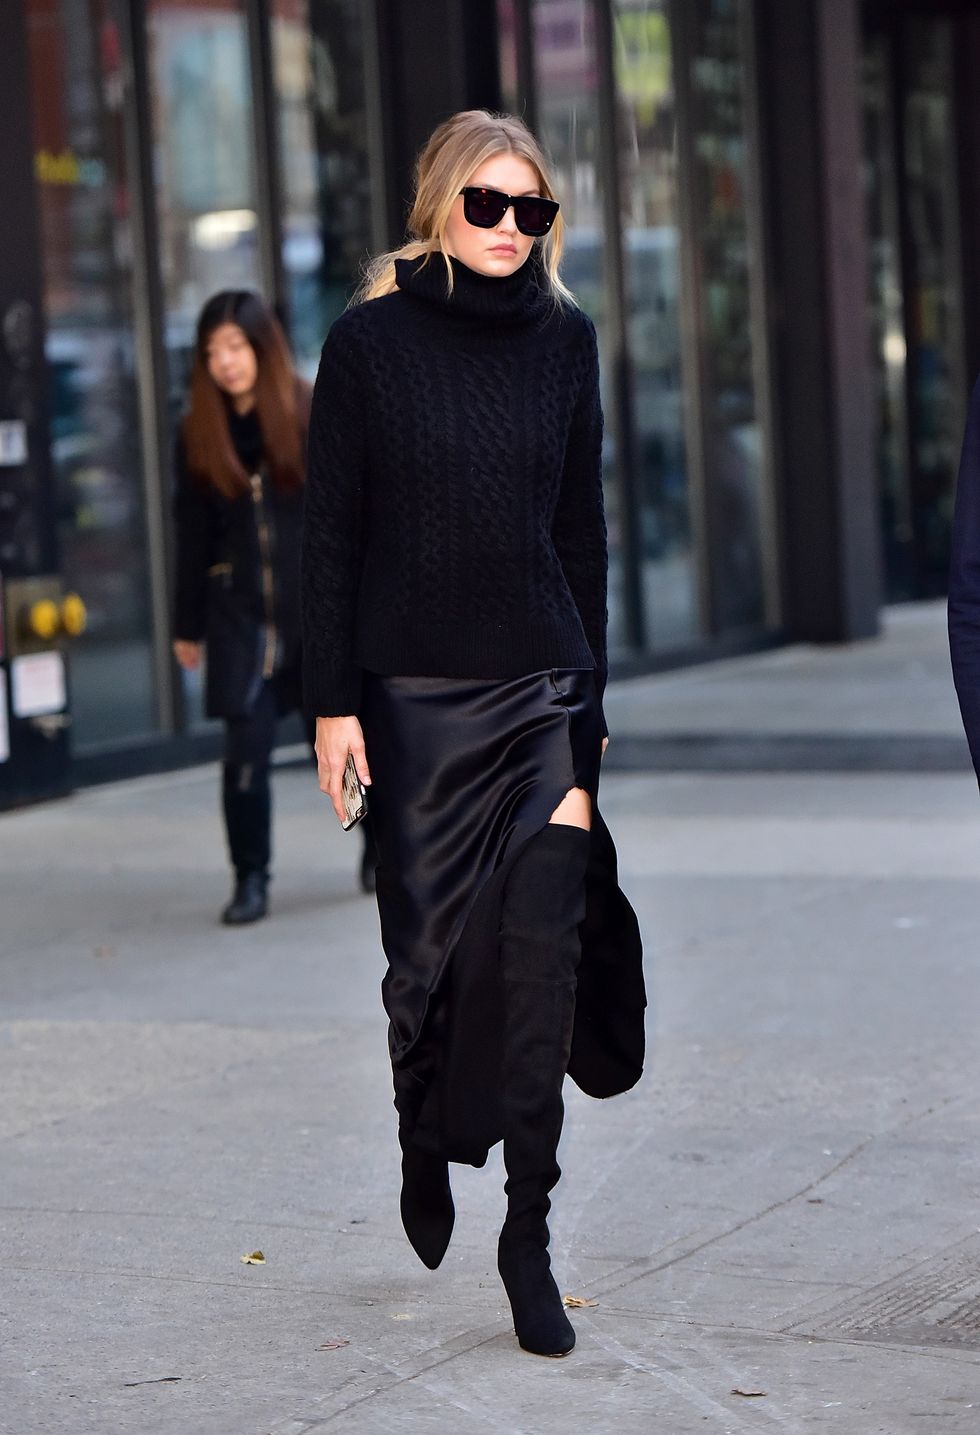 Gigi Hadid out and about wearing black boots and a jumper